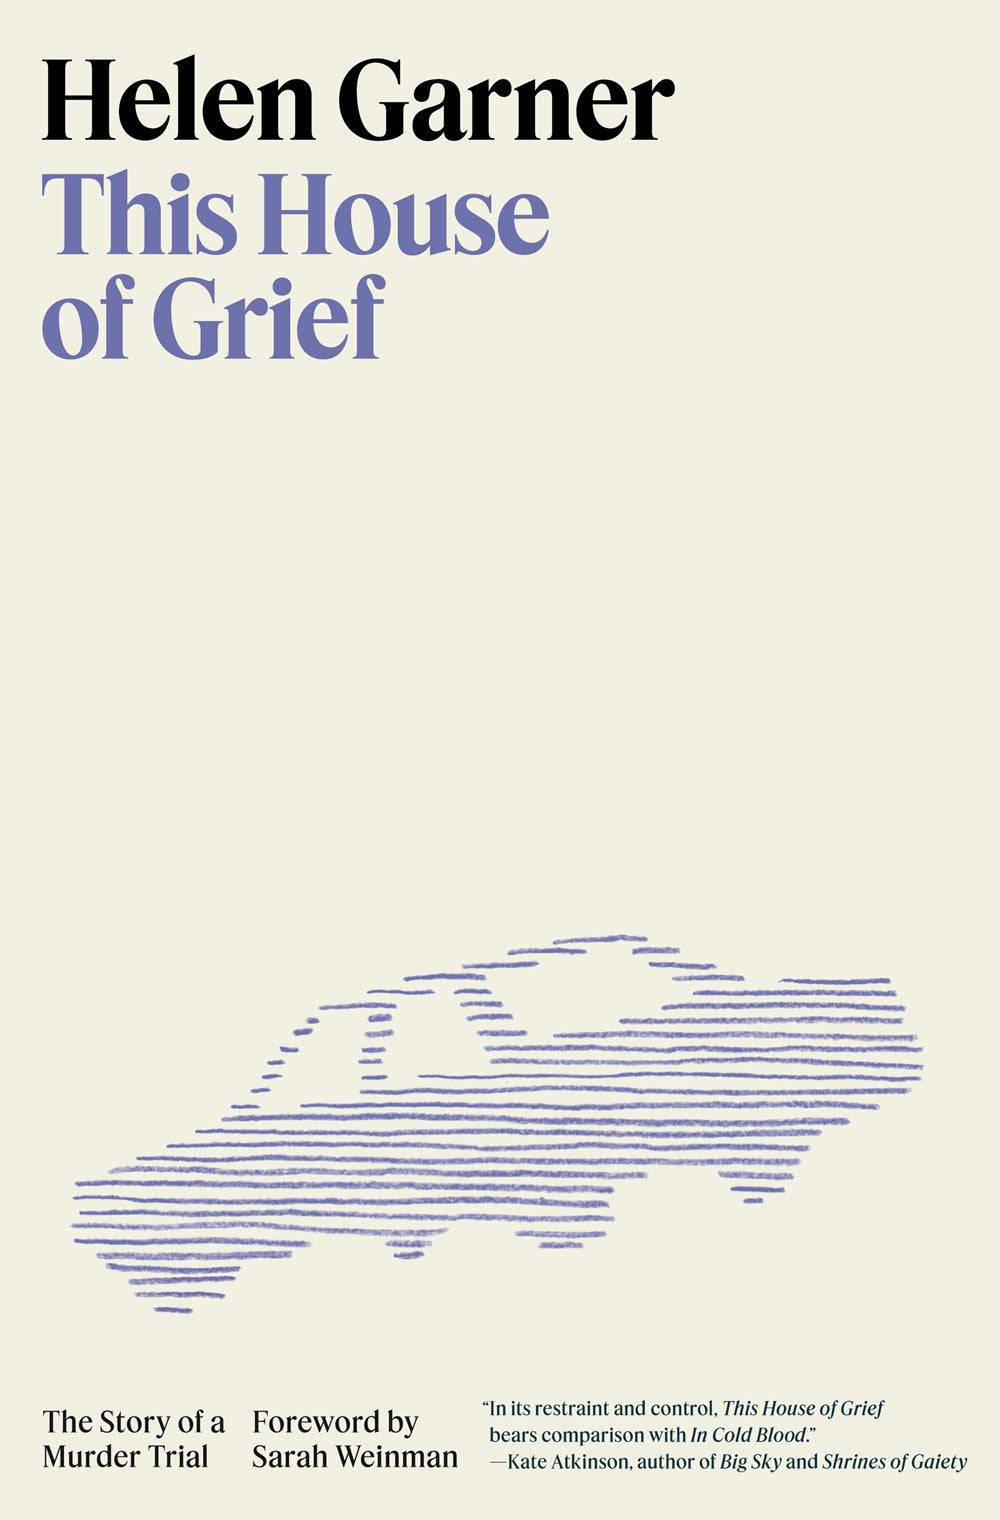 This House of Grief by Helen Garner (10/10/23)